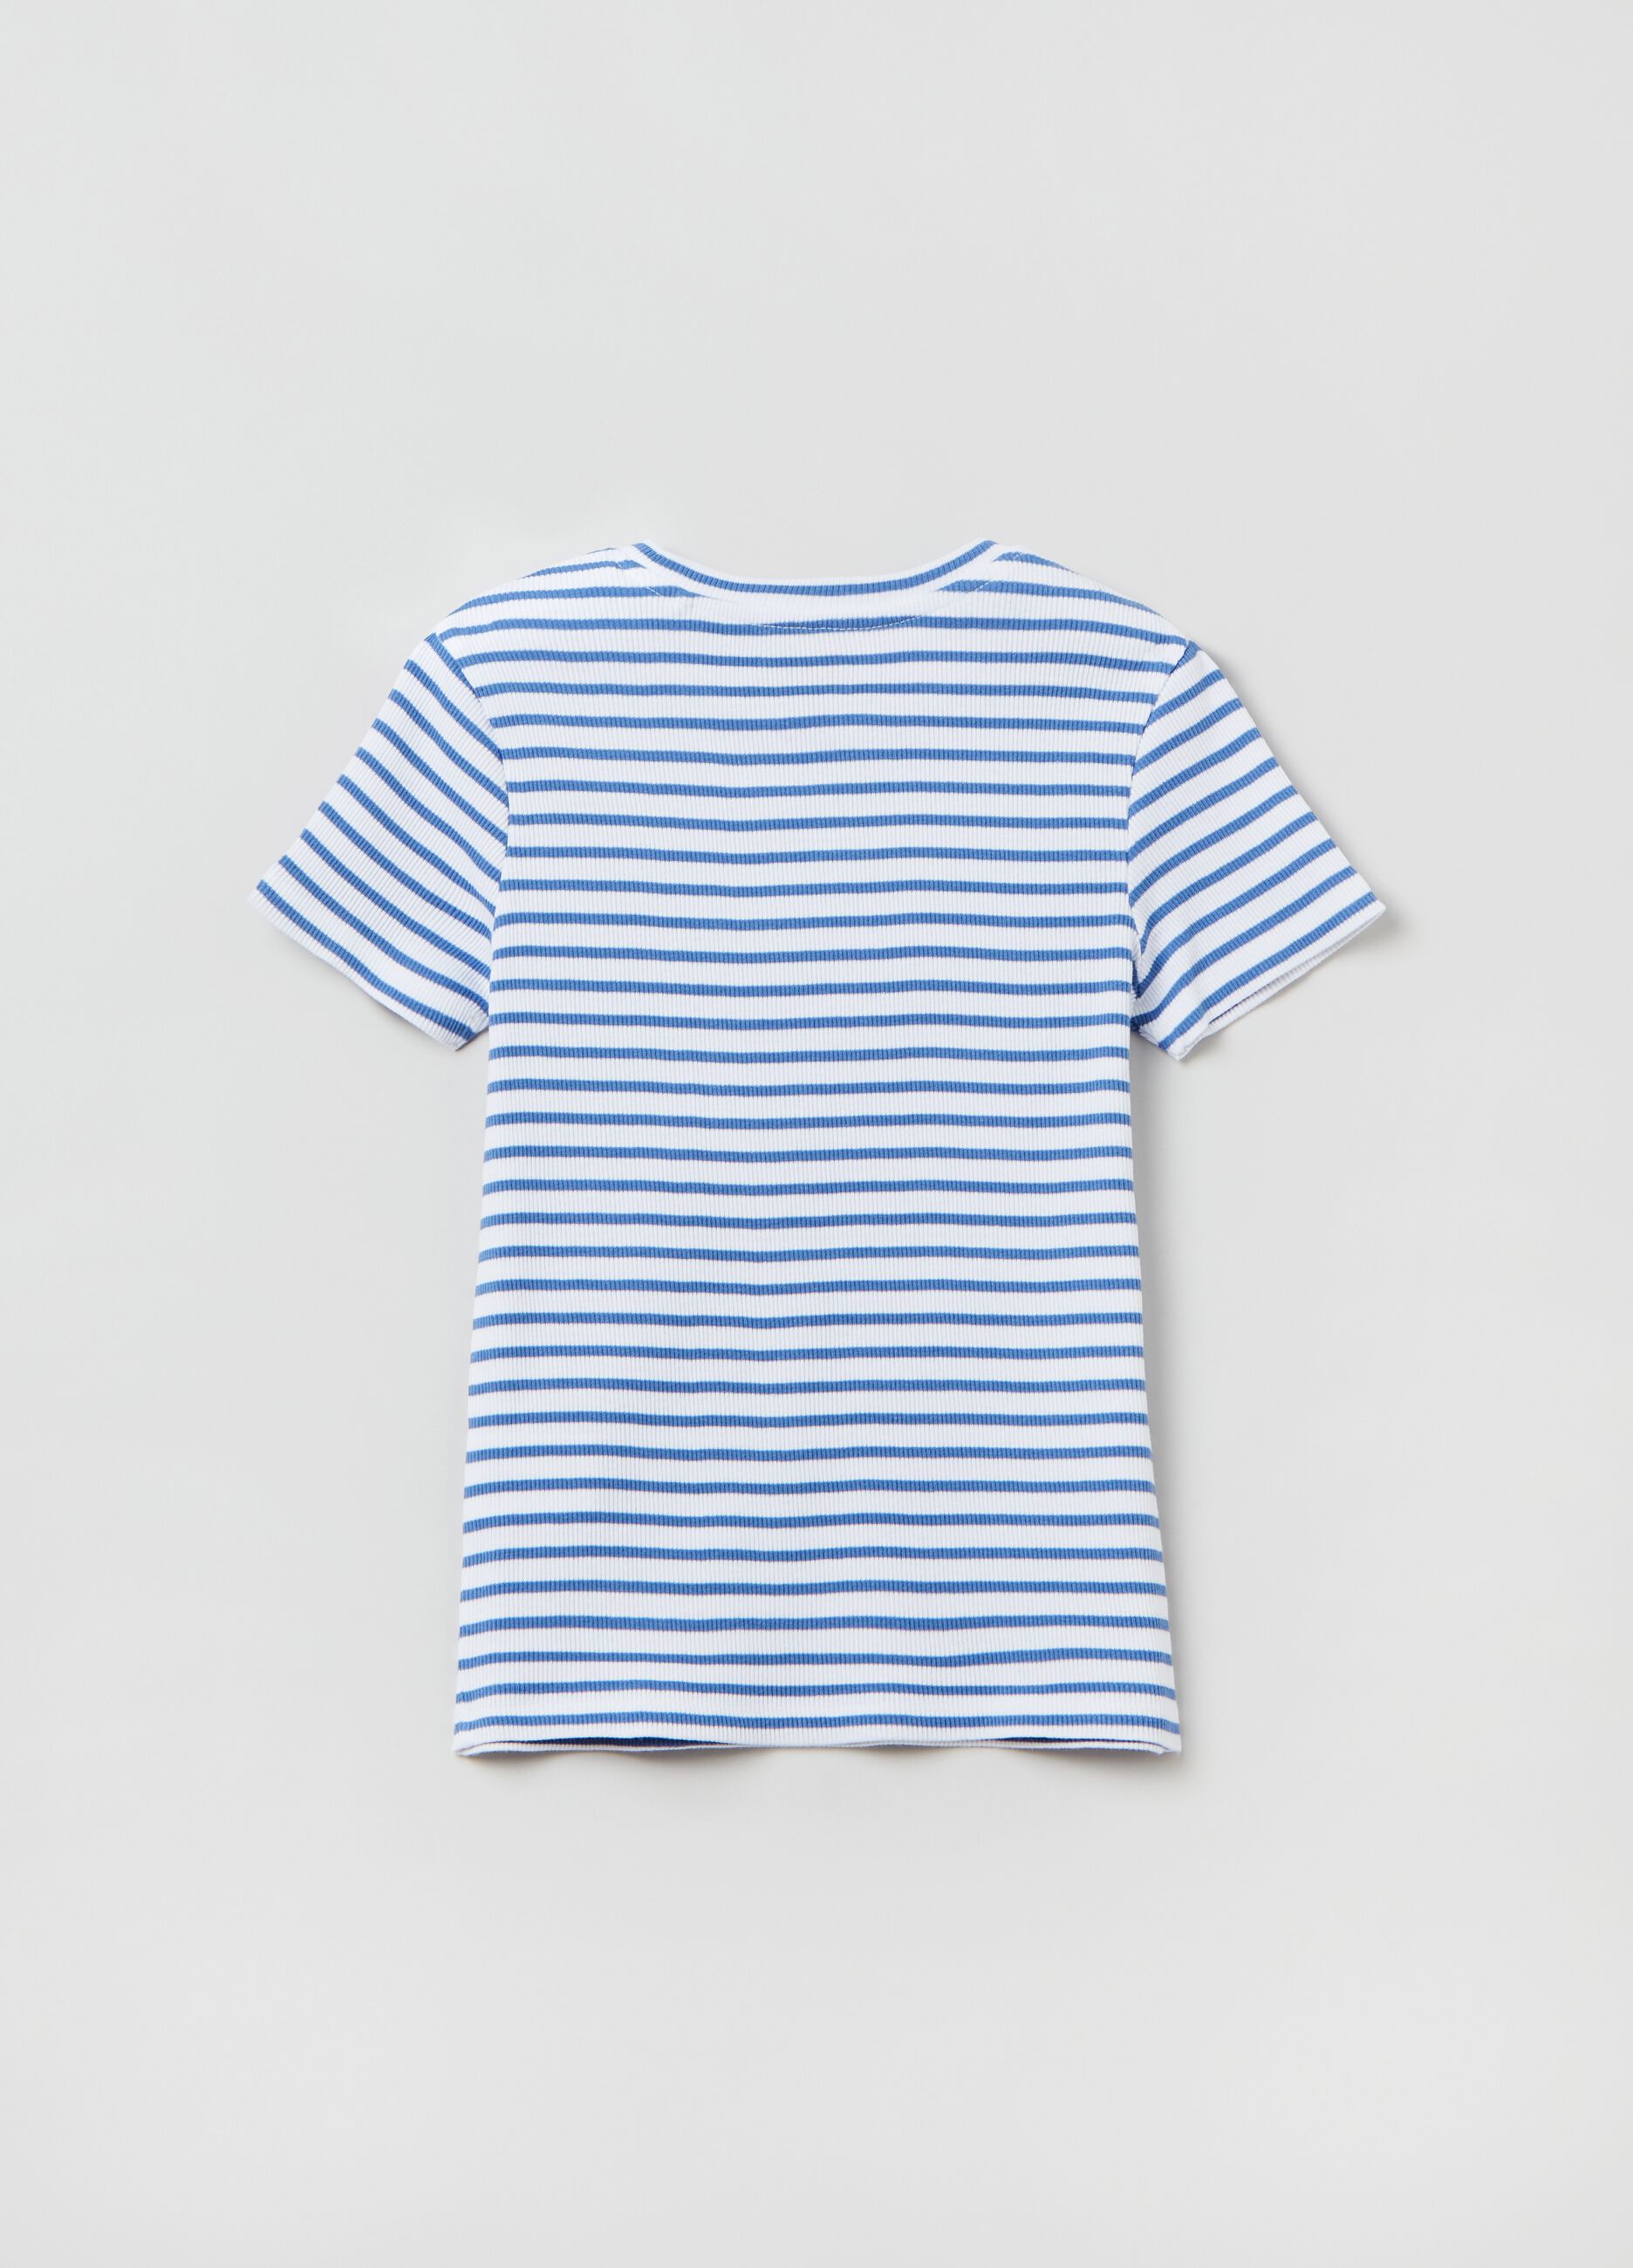 Ribbed T-shirt with striped pattern